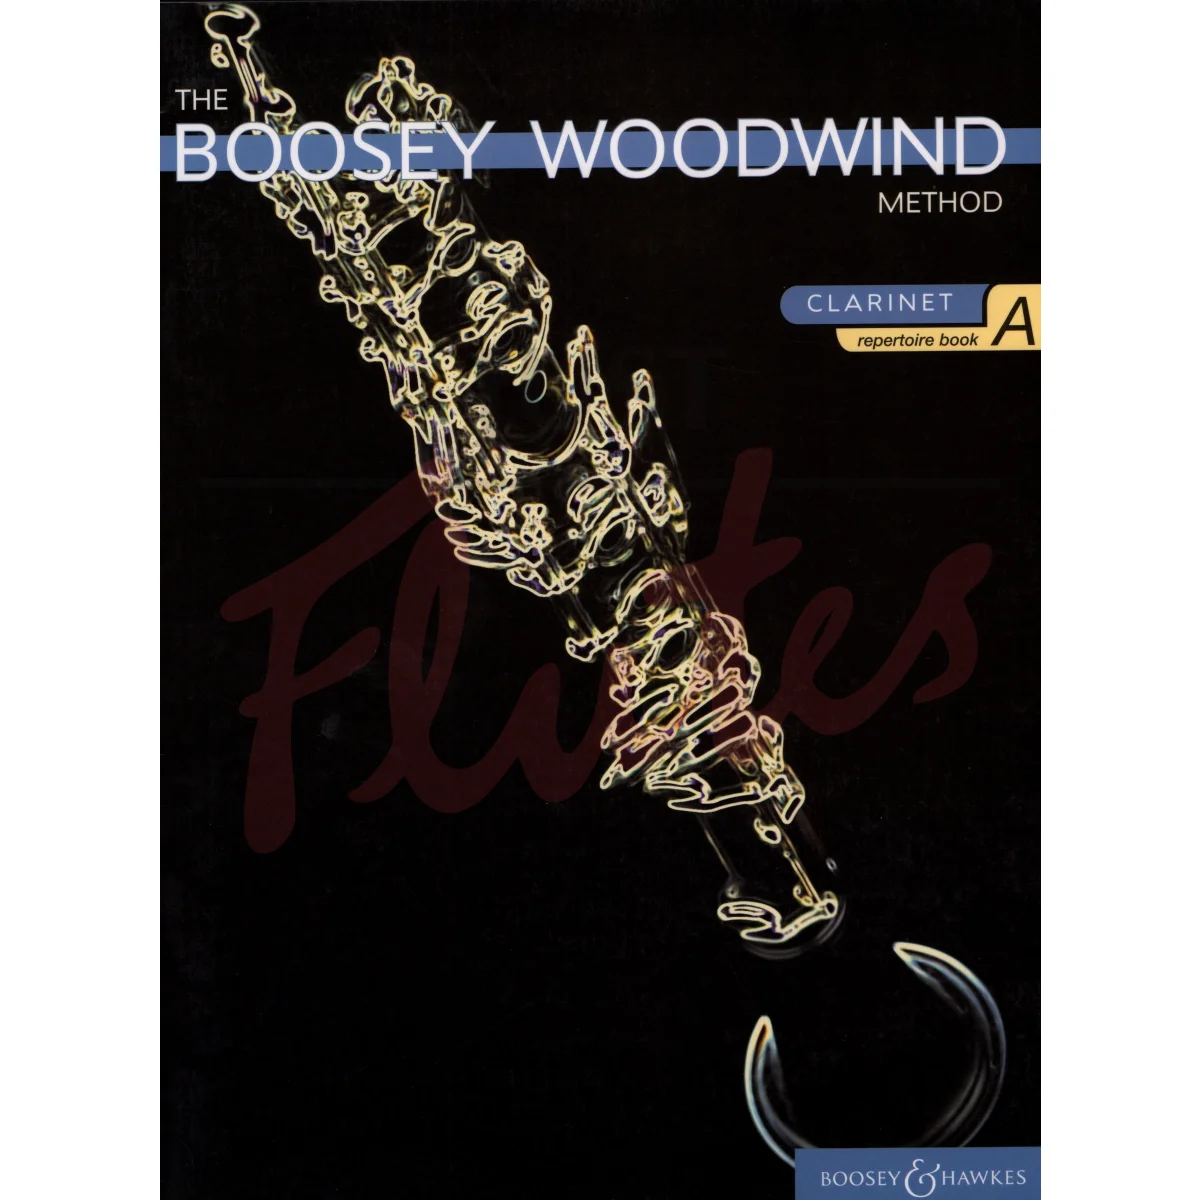 The Boosey Woodwind Method [Clarinet] Repertoire Book A